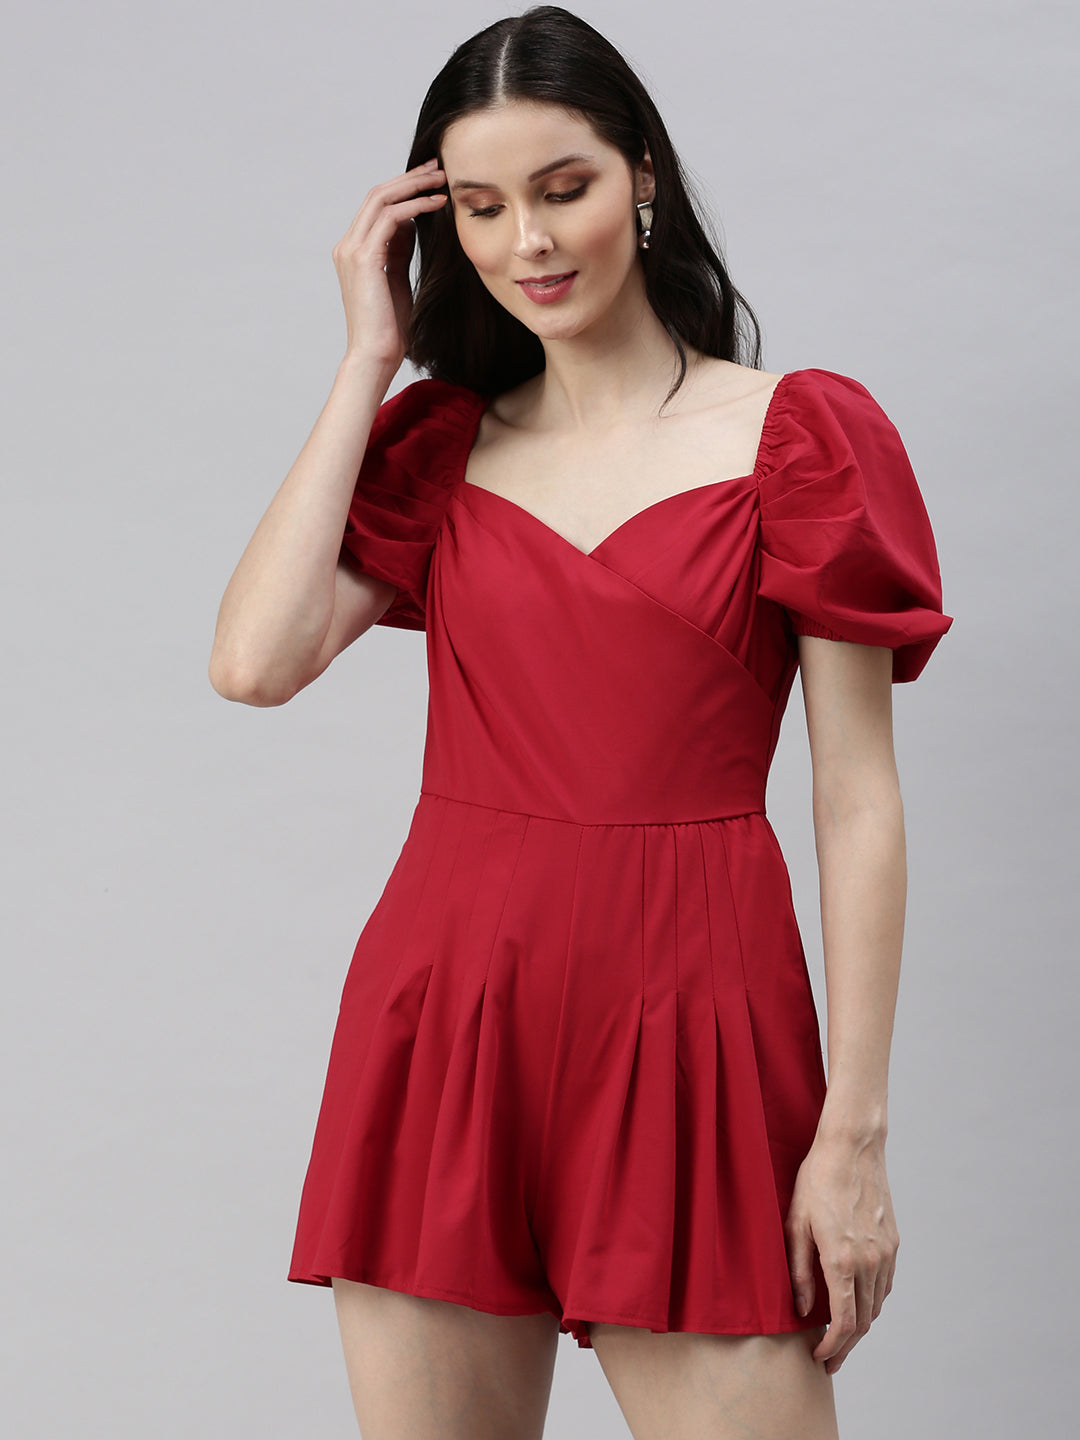 Women Sweetheart Neck Solid Red Playsuit